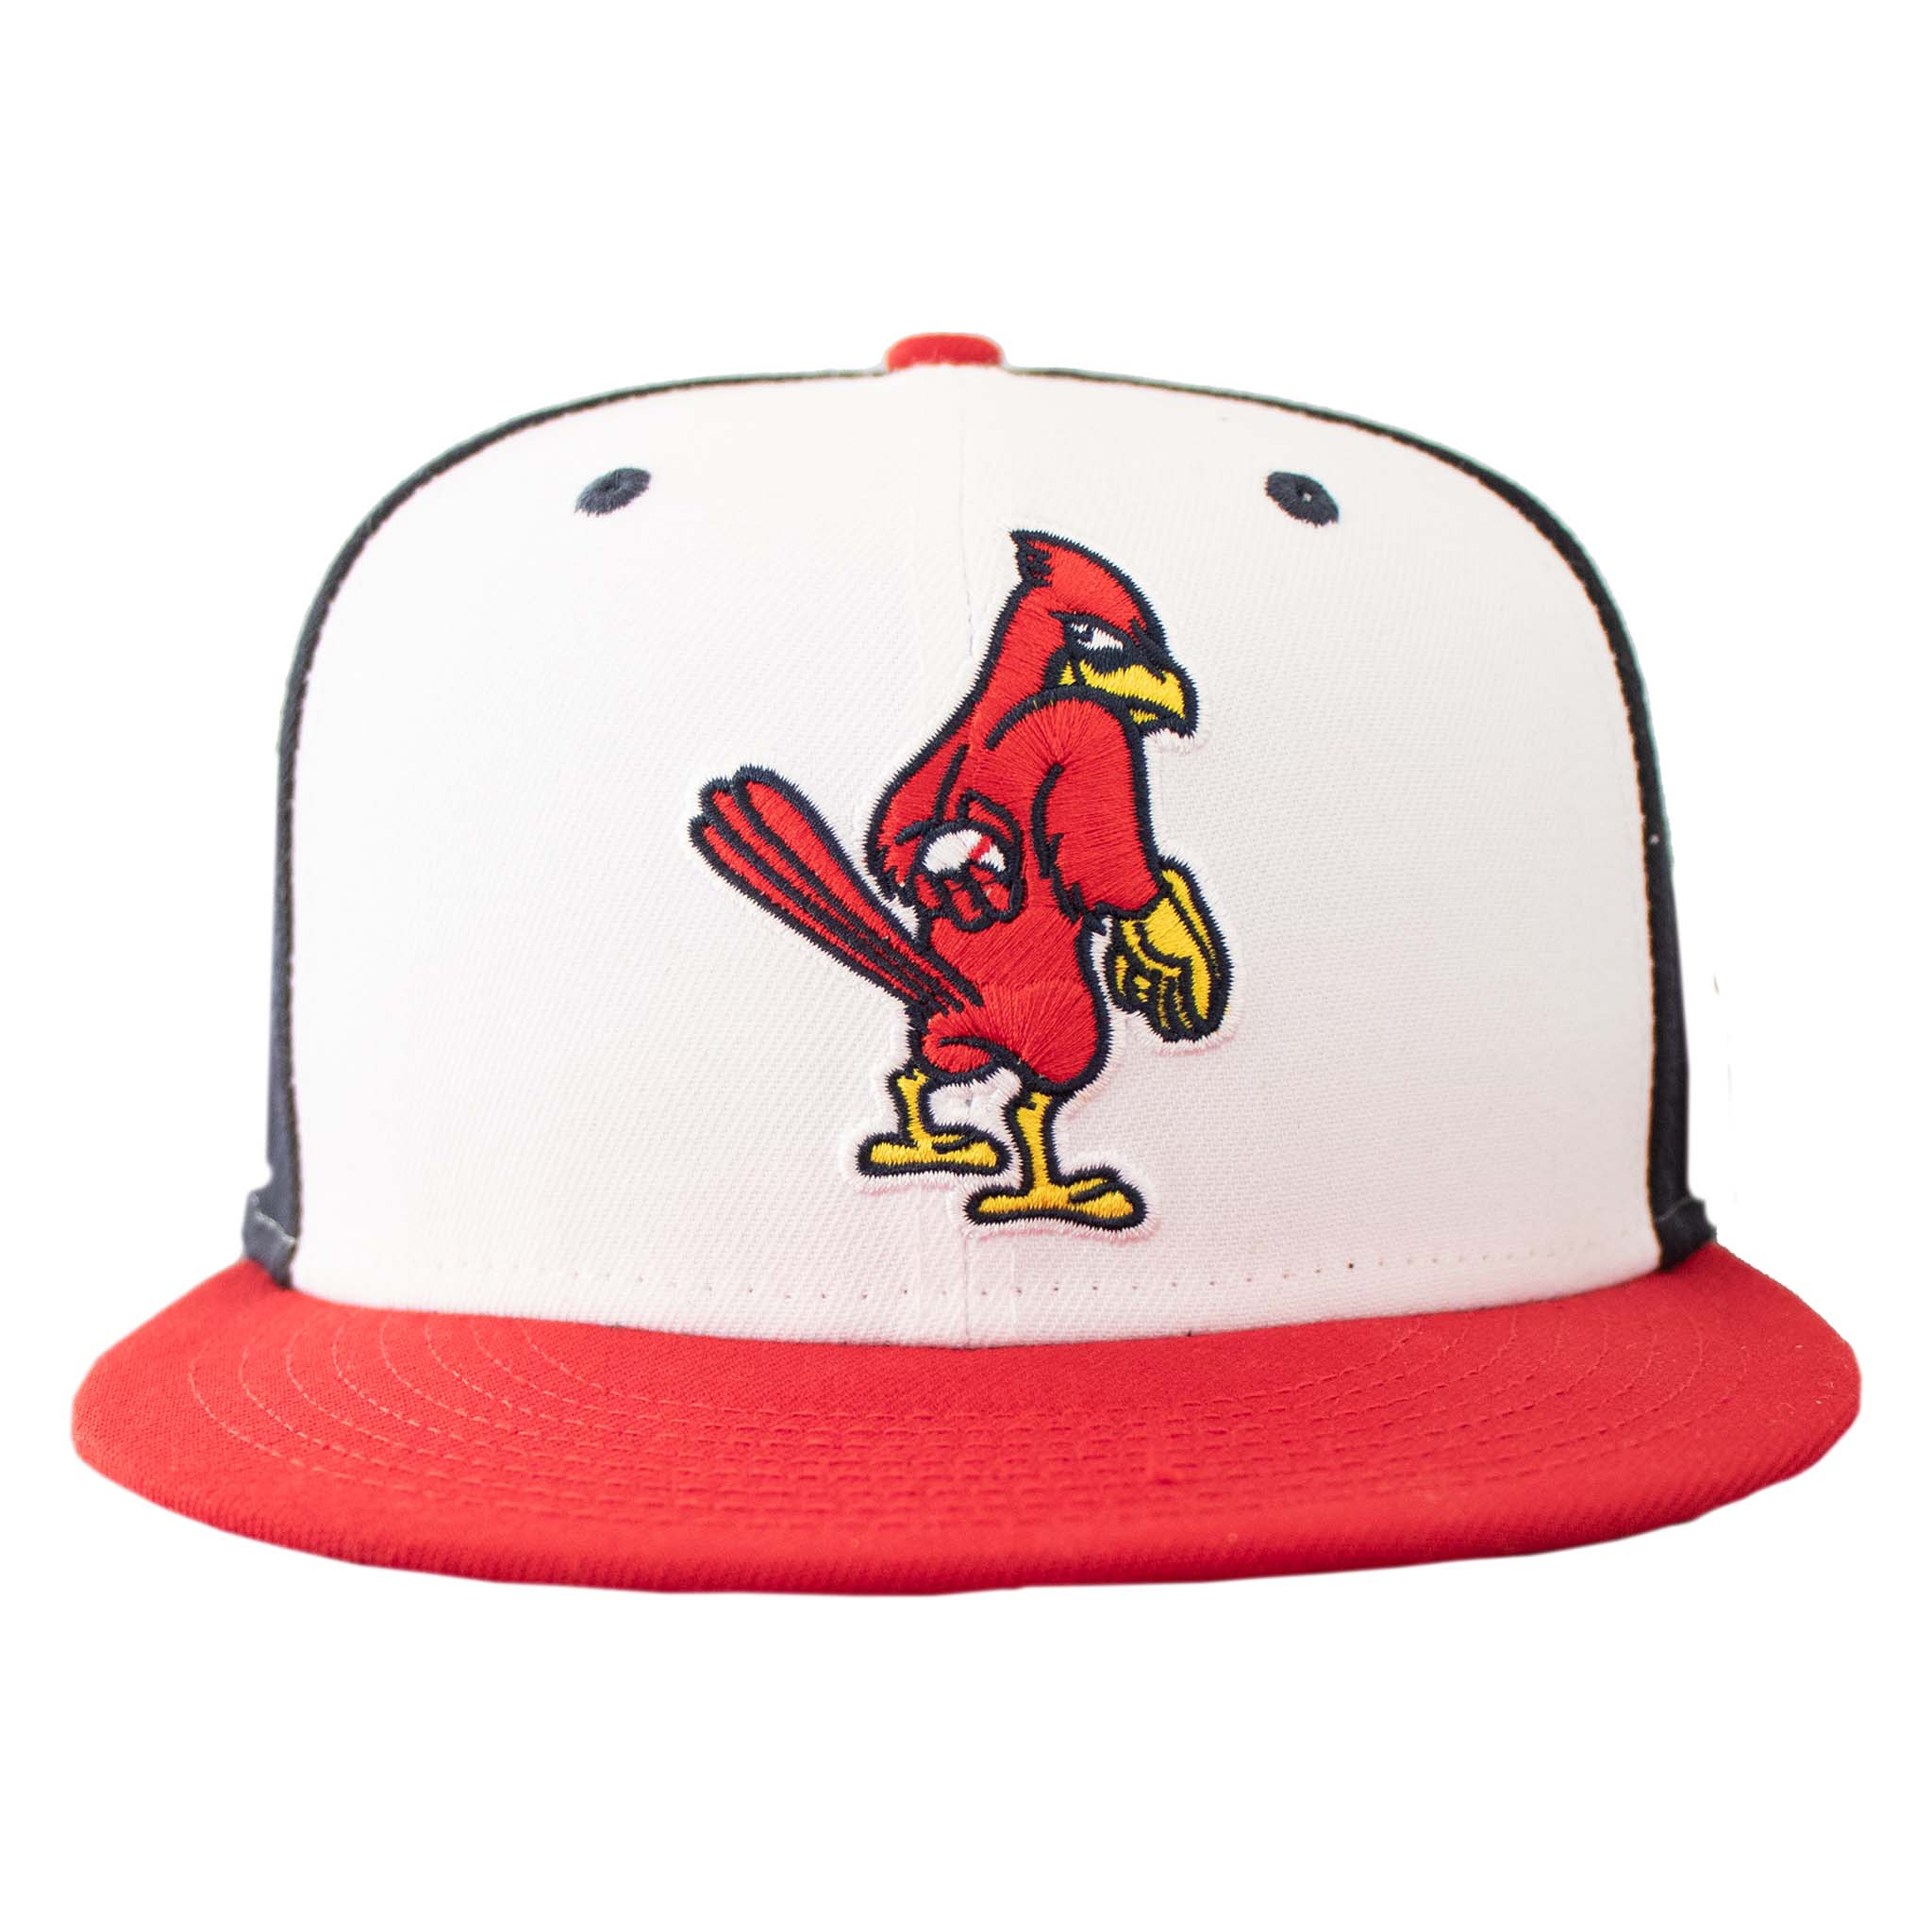 NEW ERA 59FIFTY MLB AUTHENTIC ST. LOUIS CARDINALS TEAM FITTED CAP